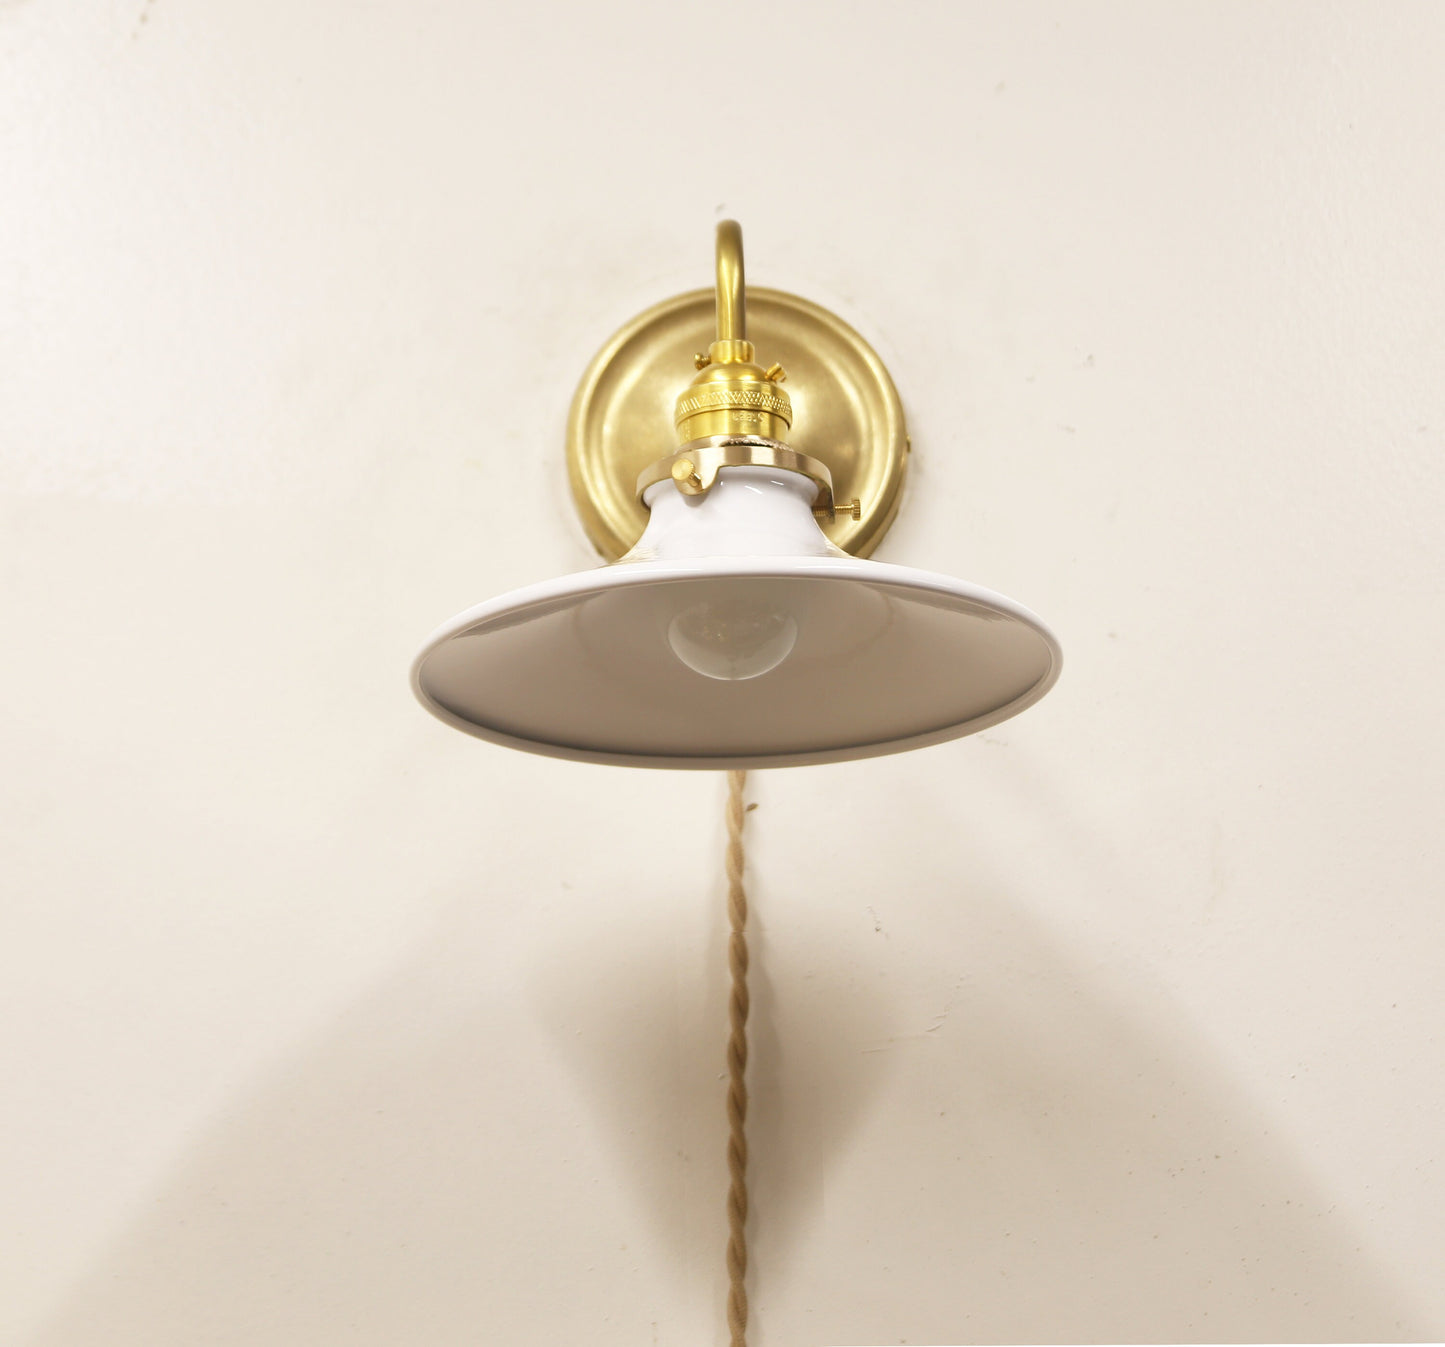 Plug-in Wall sconce Light, Brass Wall Sconce Light